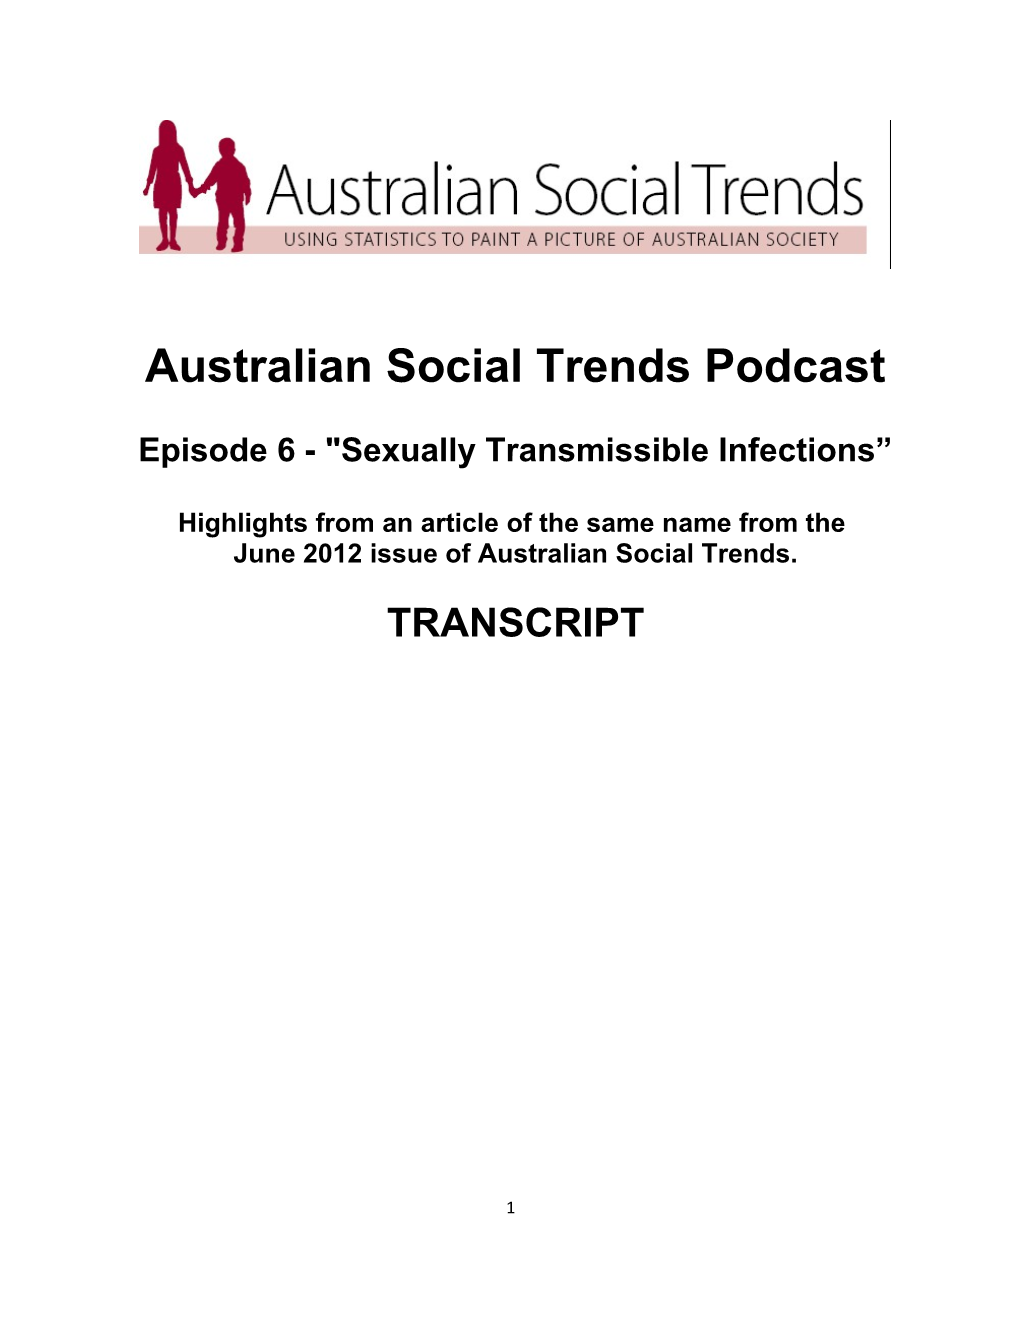 Episode 6 - Sexually Transmissible Infections